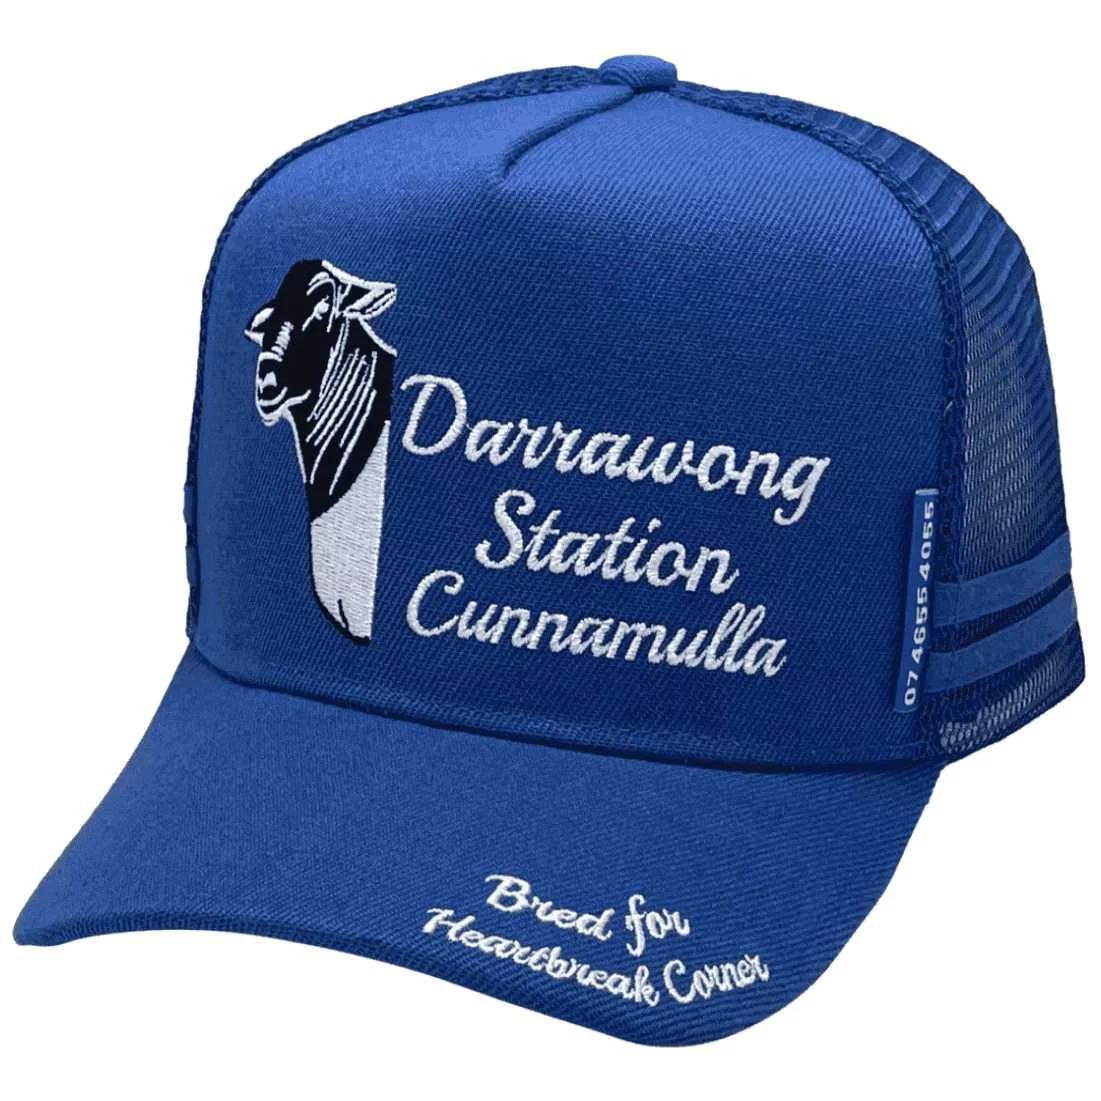 Darrawong Station Cunnamulla Qld HP Midrange Aussie Trucker Hats with Australian Head Fit Crown and 2 Side Bands